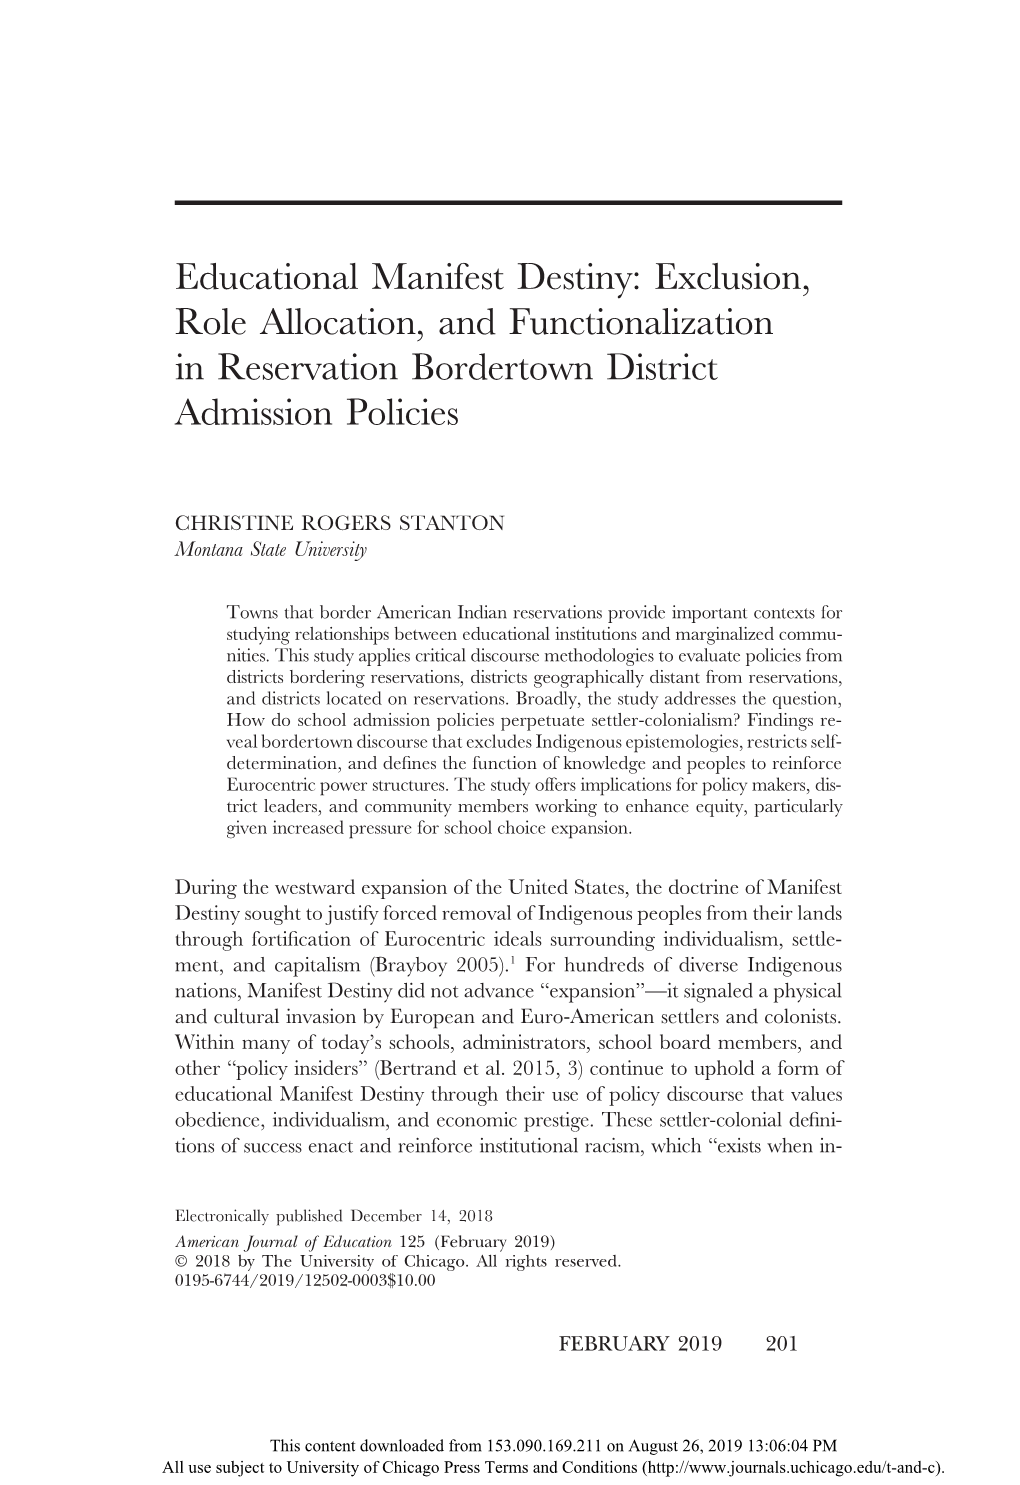 Educational Manifest Destiny: Exclusion, Role Allocation, and Functionalization in Reservation Bordertown District Admission Policies